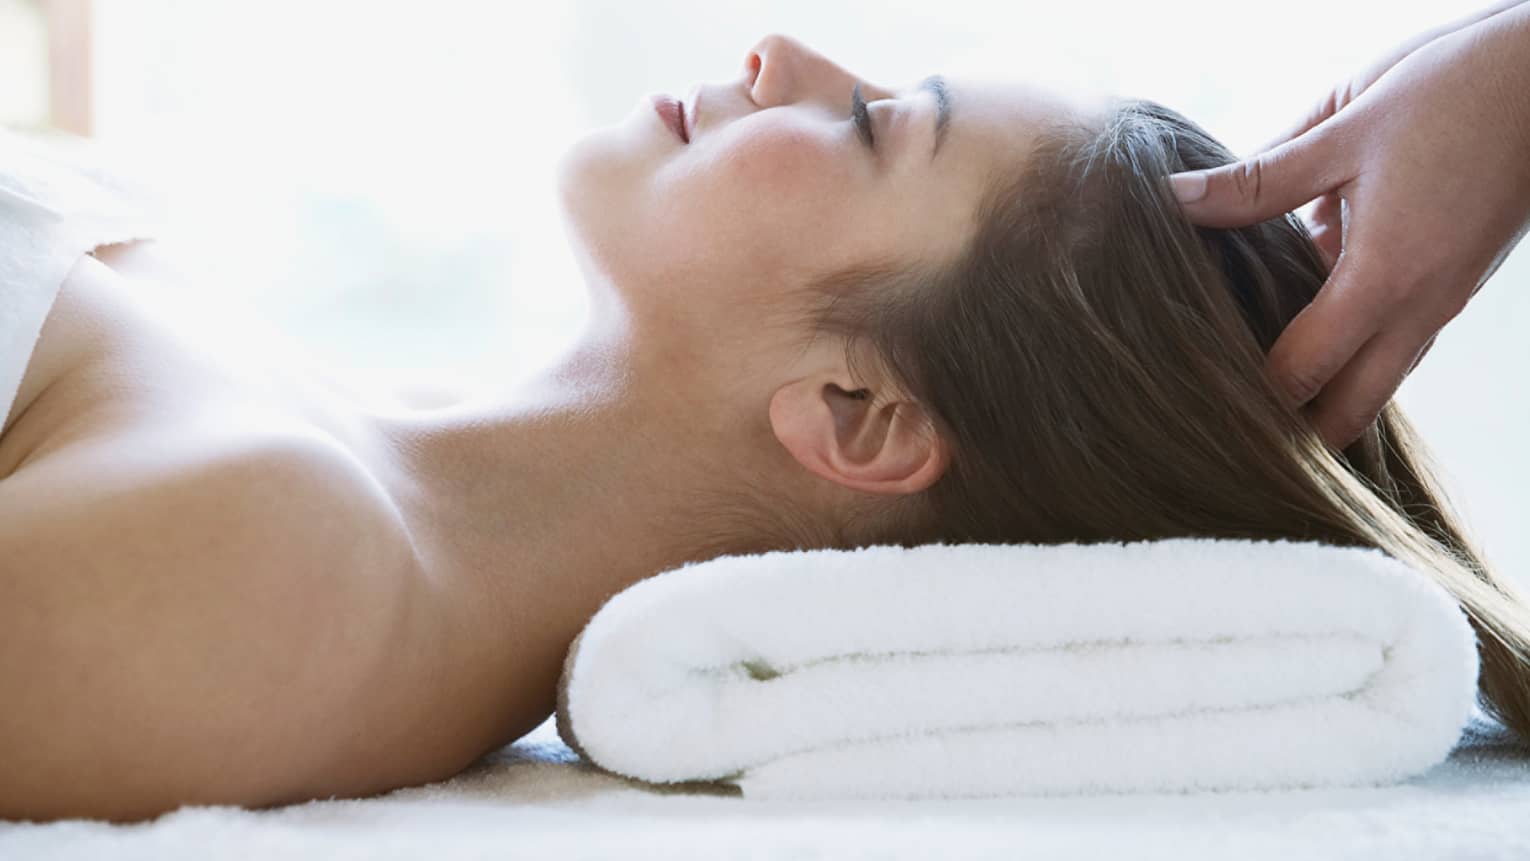 Woman lays on back with head on folded white towel, closes eyes as hands massage her scalp